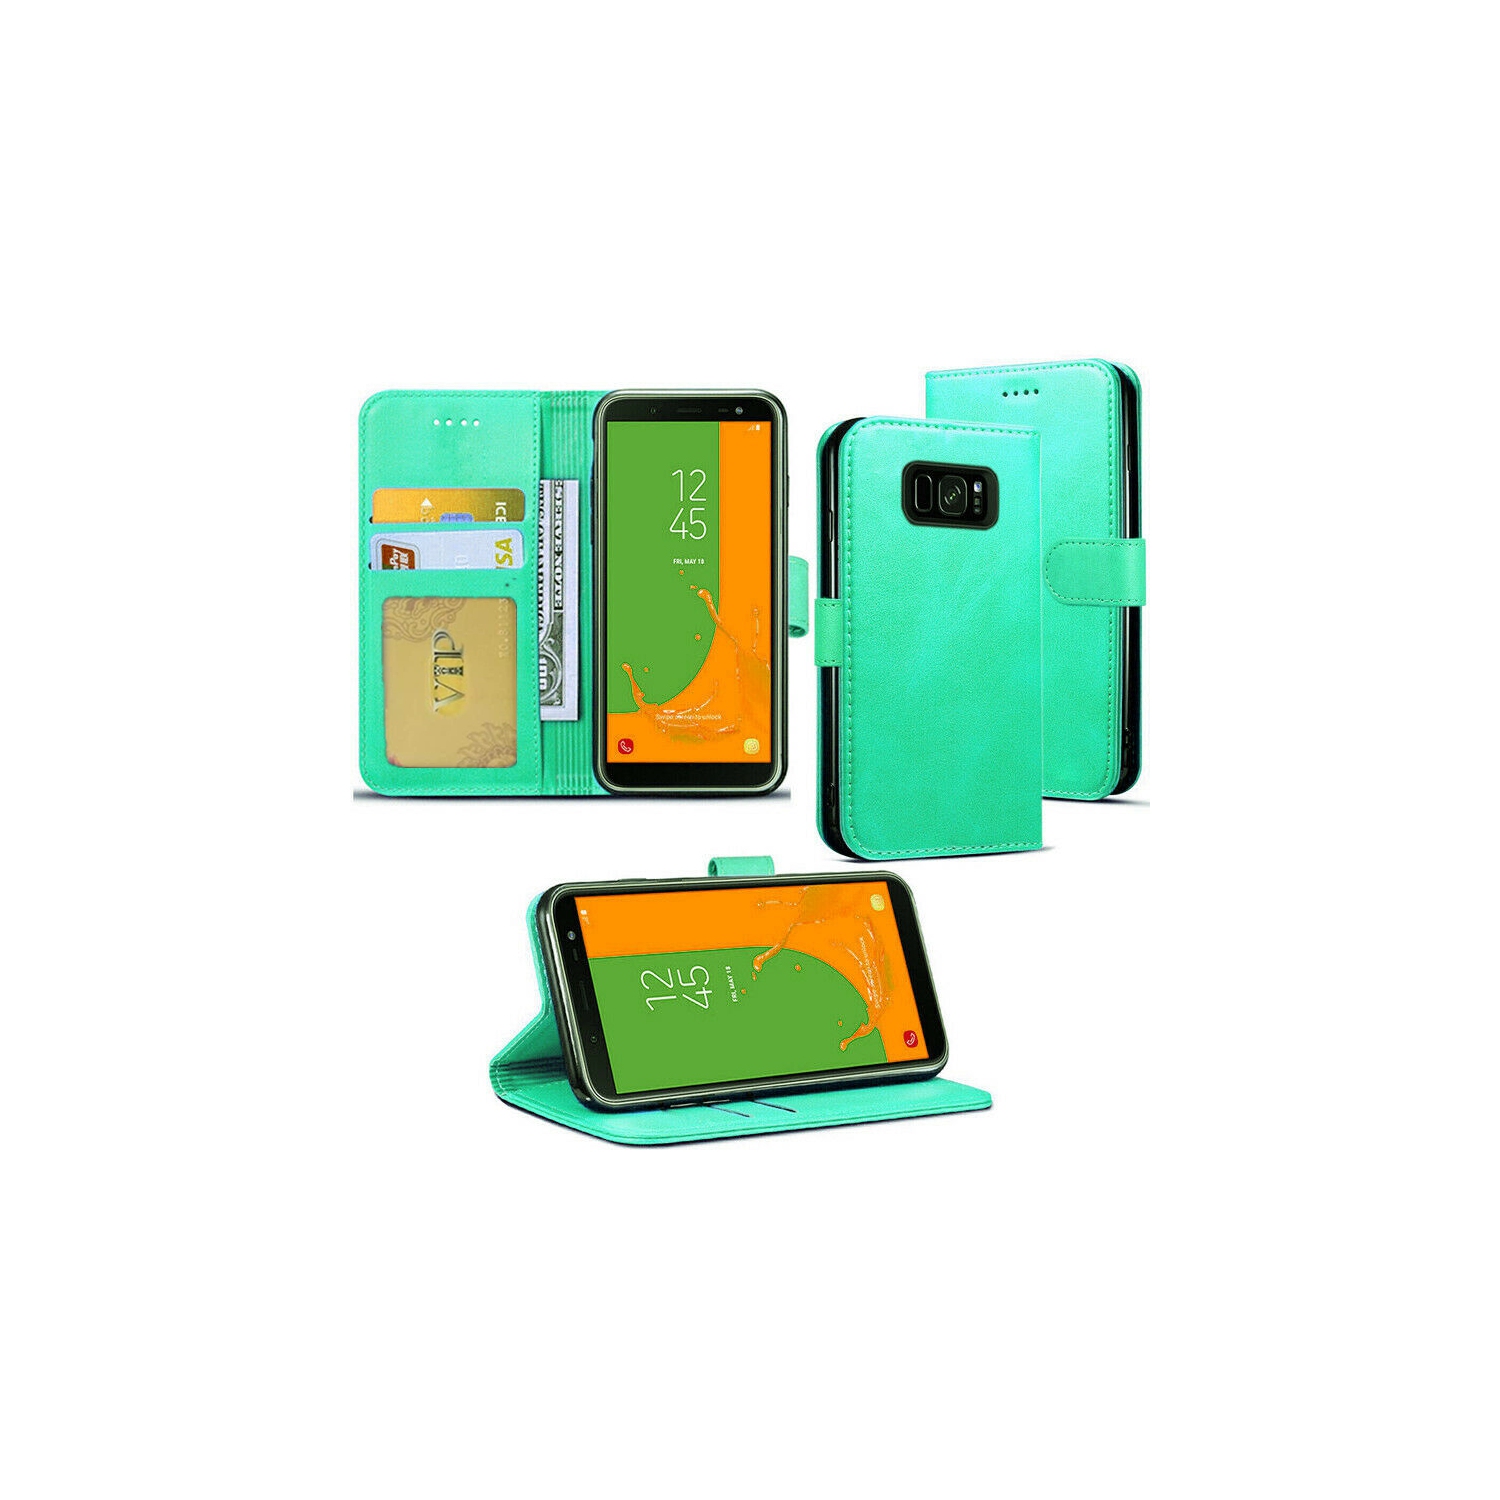 【CSmart】 Magnetic Card Slot Leather Folio Wallet Flip Case Cover for Samsung Galaxy S6 Edge Plus, Mint